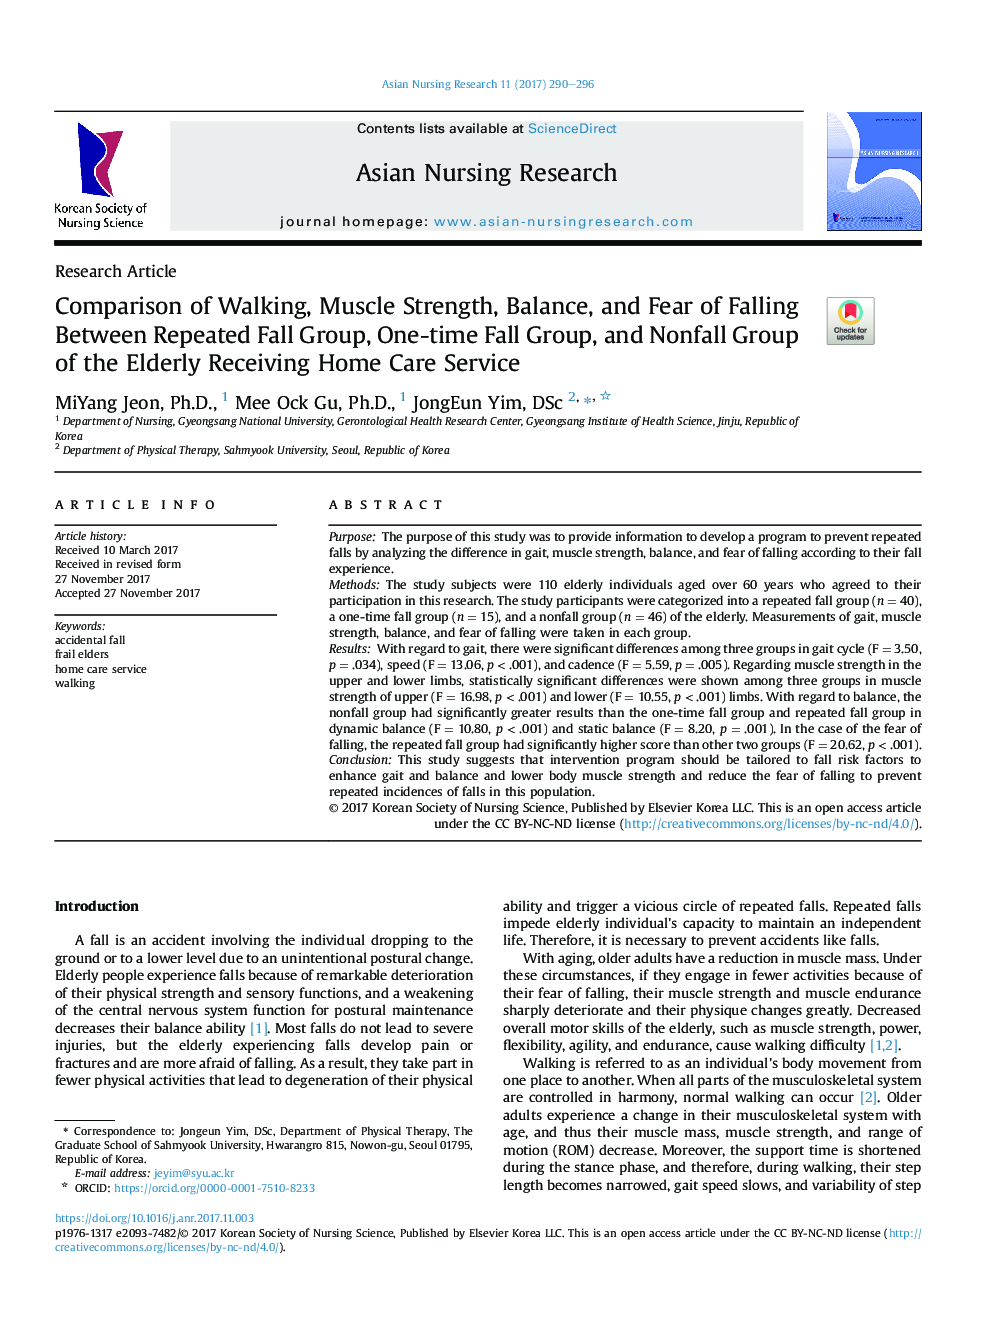 Comparison of Walking, Muscle Strength, Balance, and Fear of Falling Between Repeated Fall Group, One-time Fall Group, and Nonfall Group of the Elderly Receiving Home Care Service